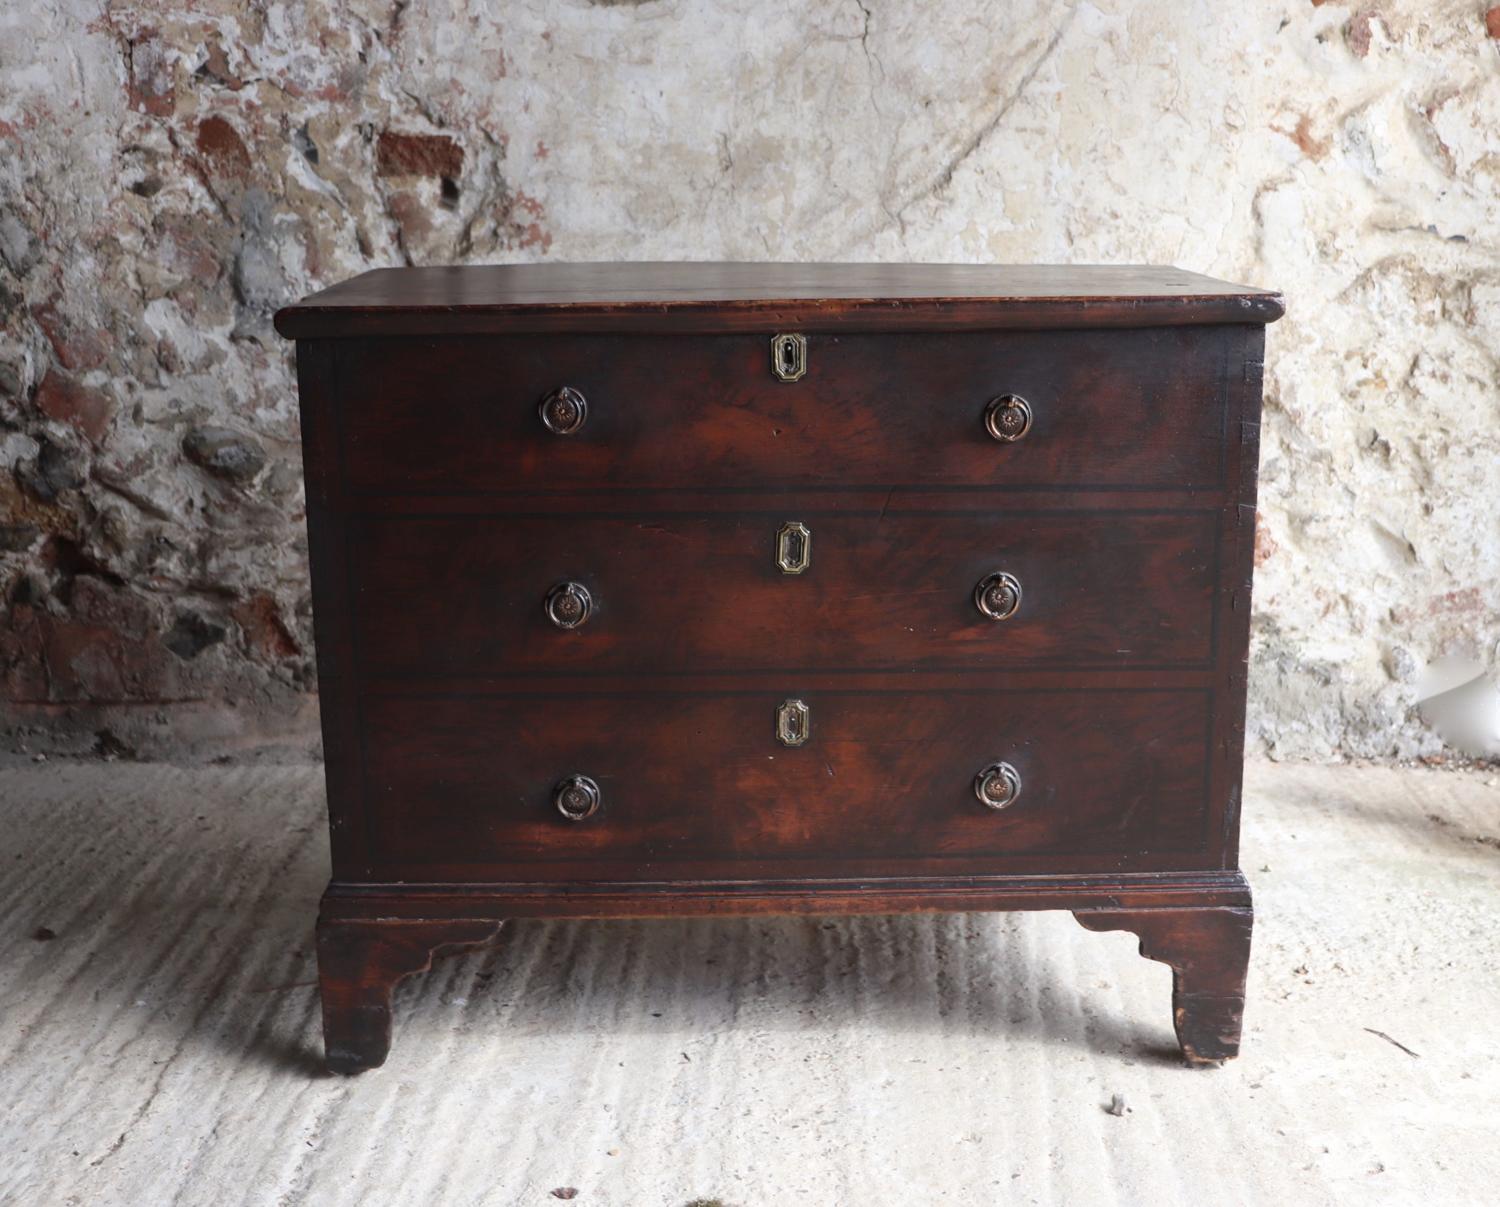 Painted pine chest c 1860